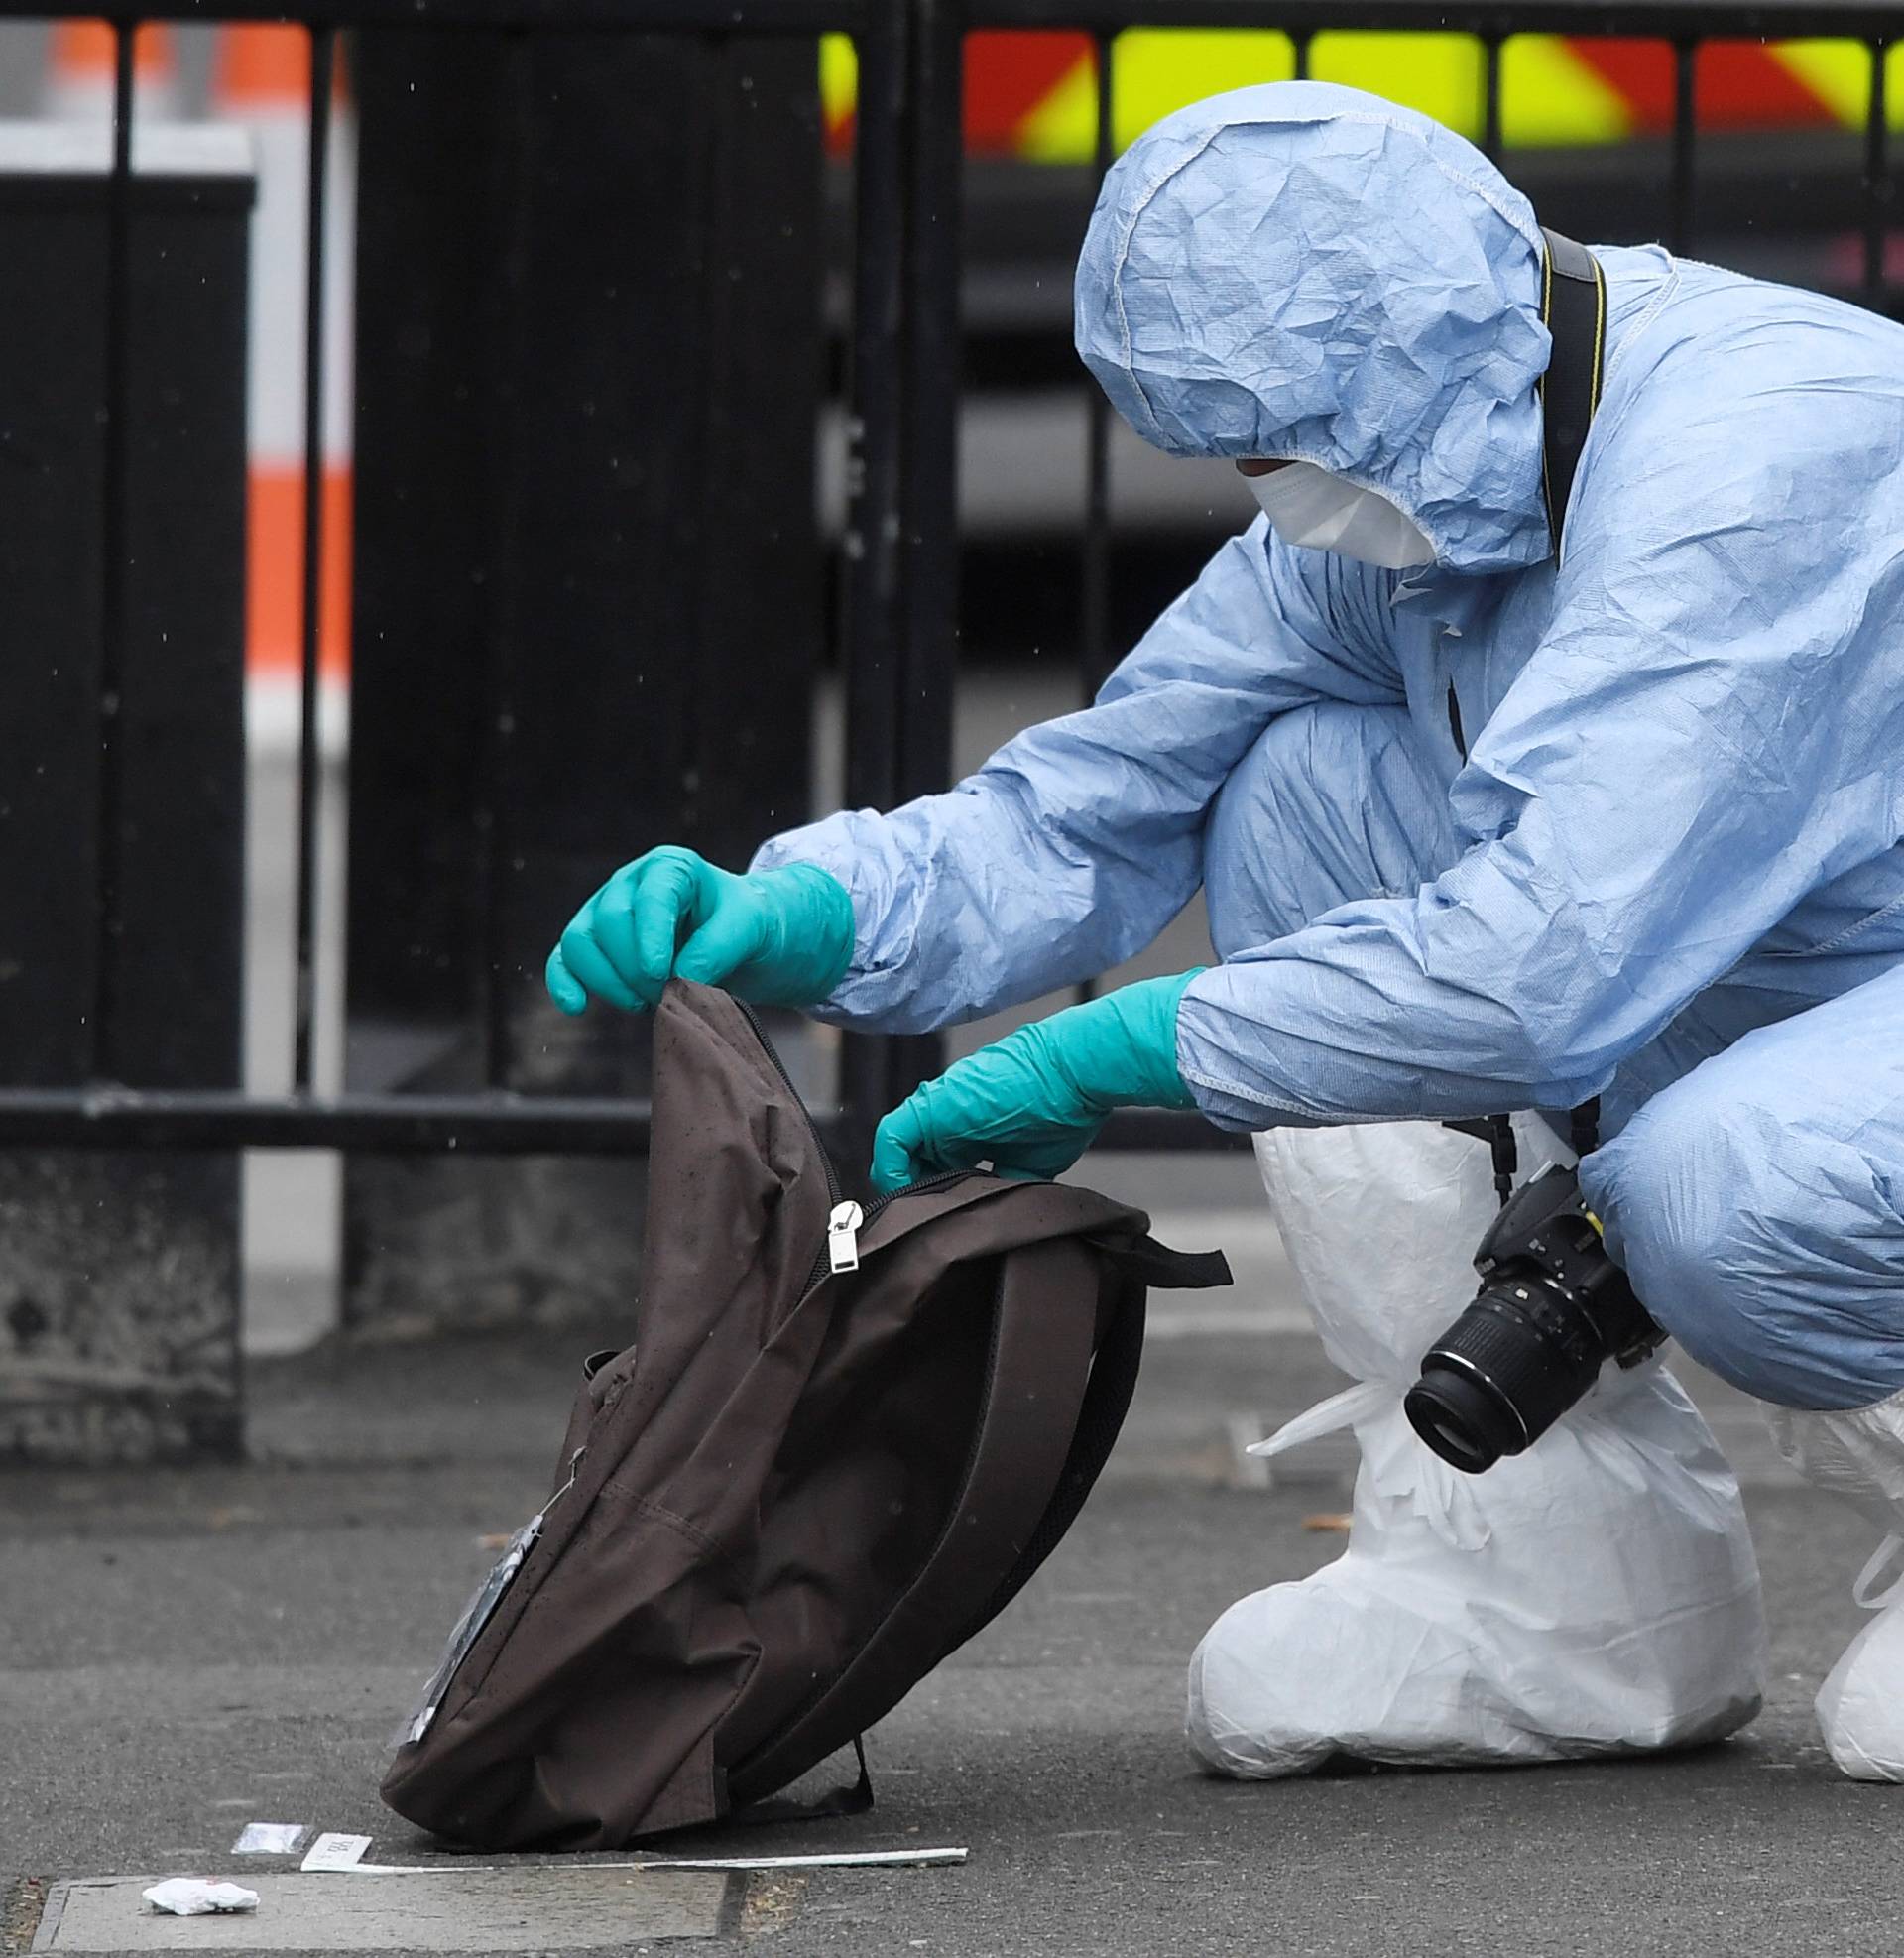 A forensic investigator opens a rucksack after man was arrested on Whitehall in Westminster in central London